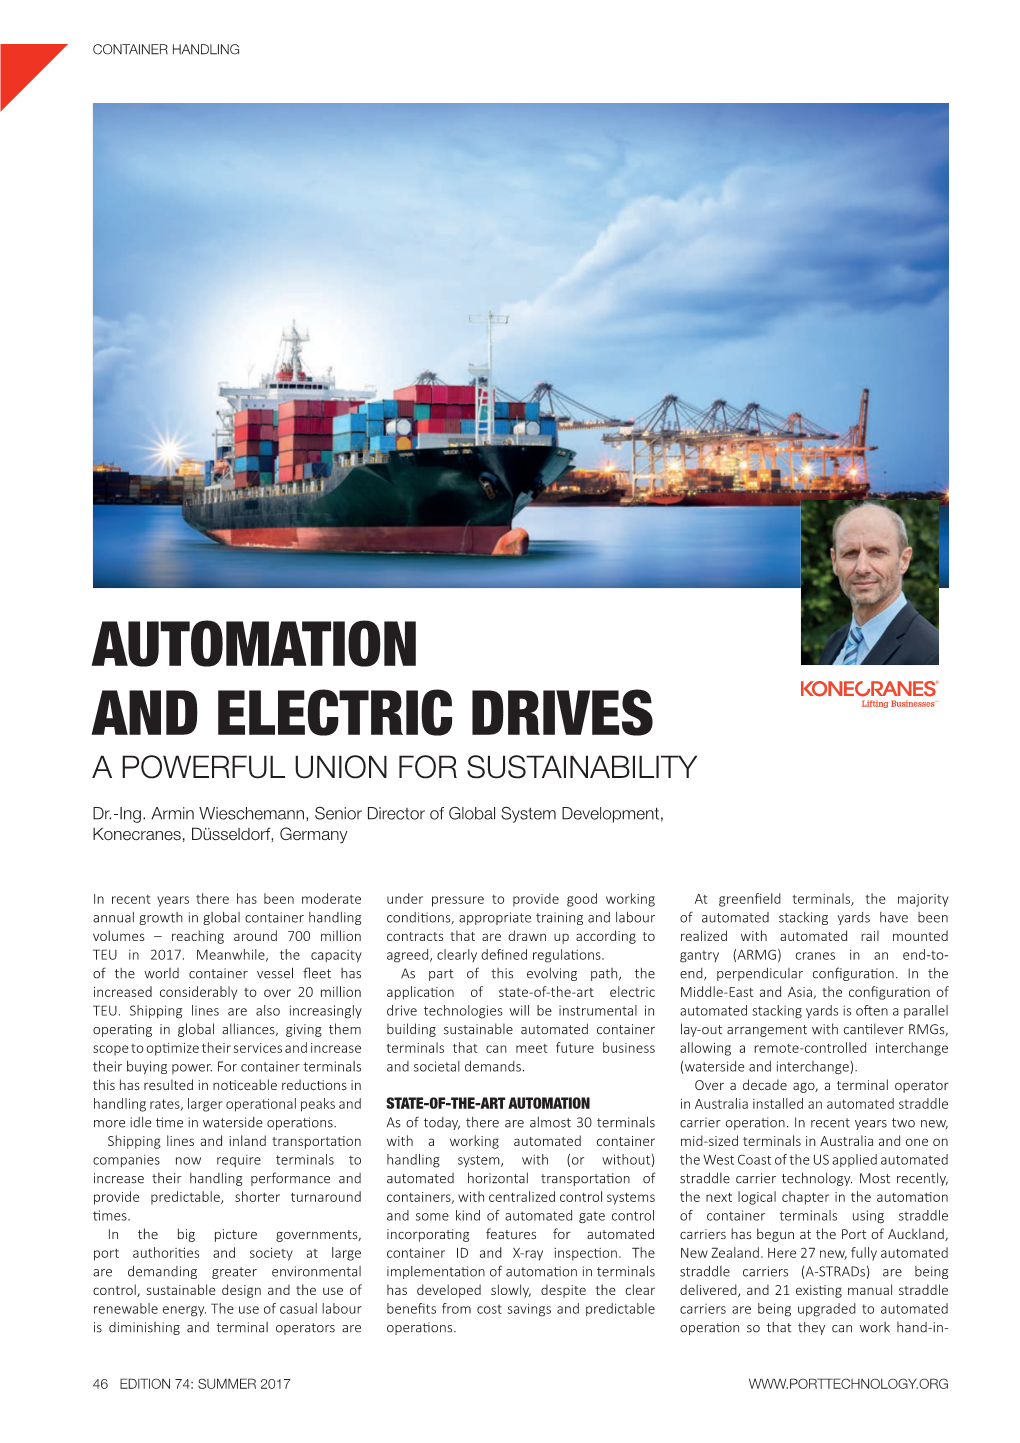 Automation and Electric Drives a Powerful Union for Sustainability